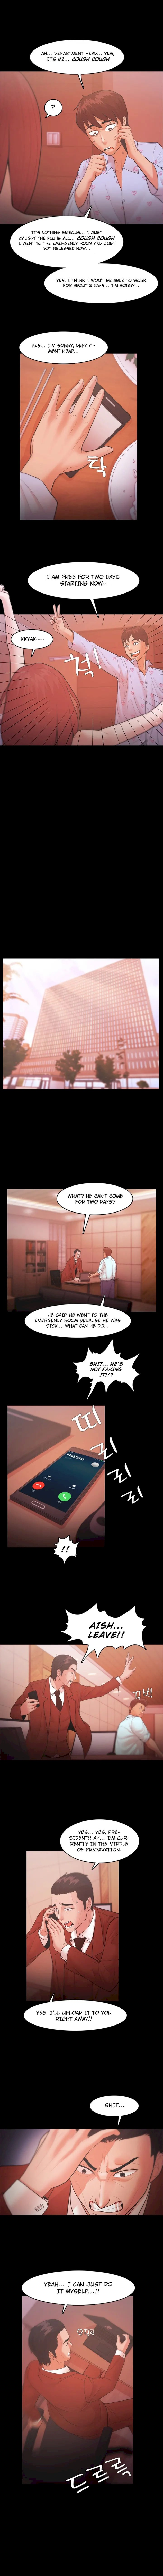 Loser (Team 201) - Chapter 19 Page 6